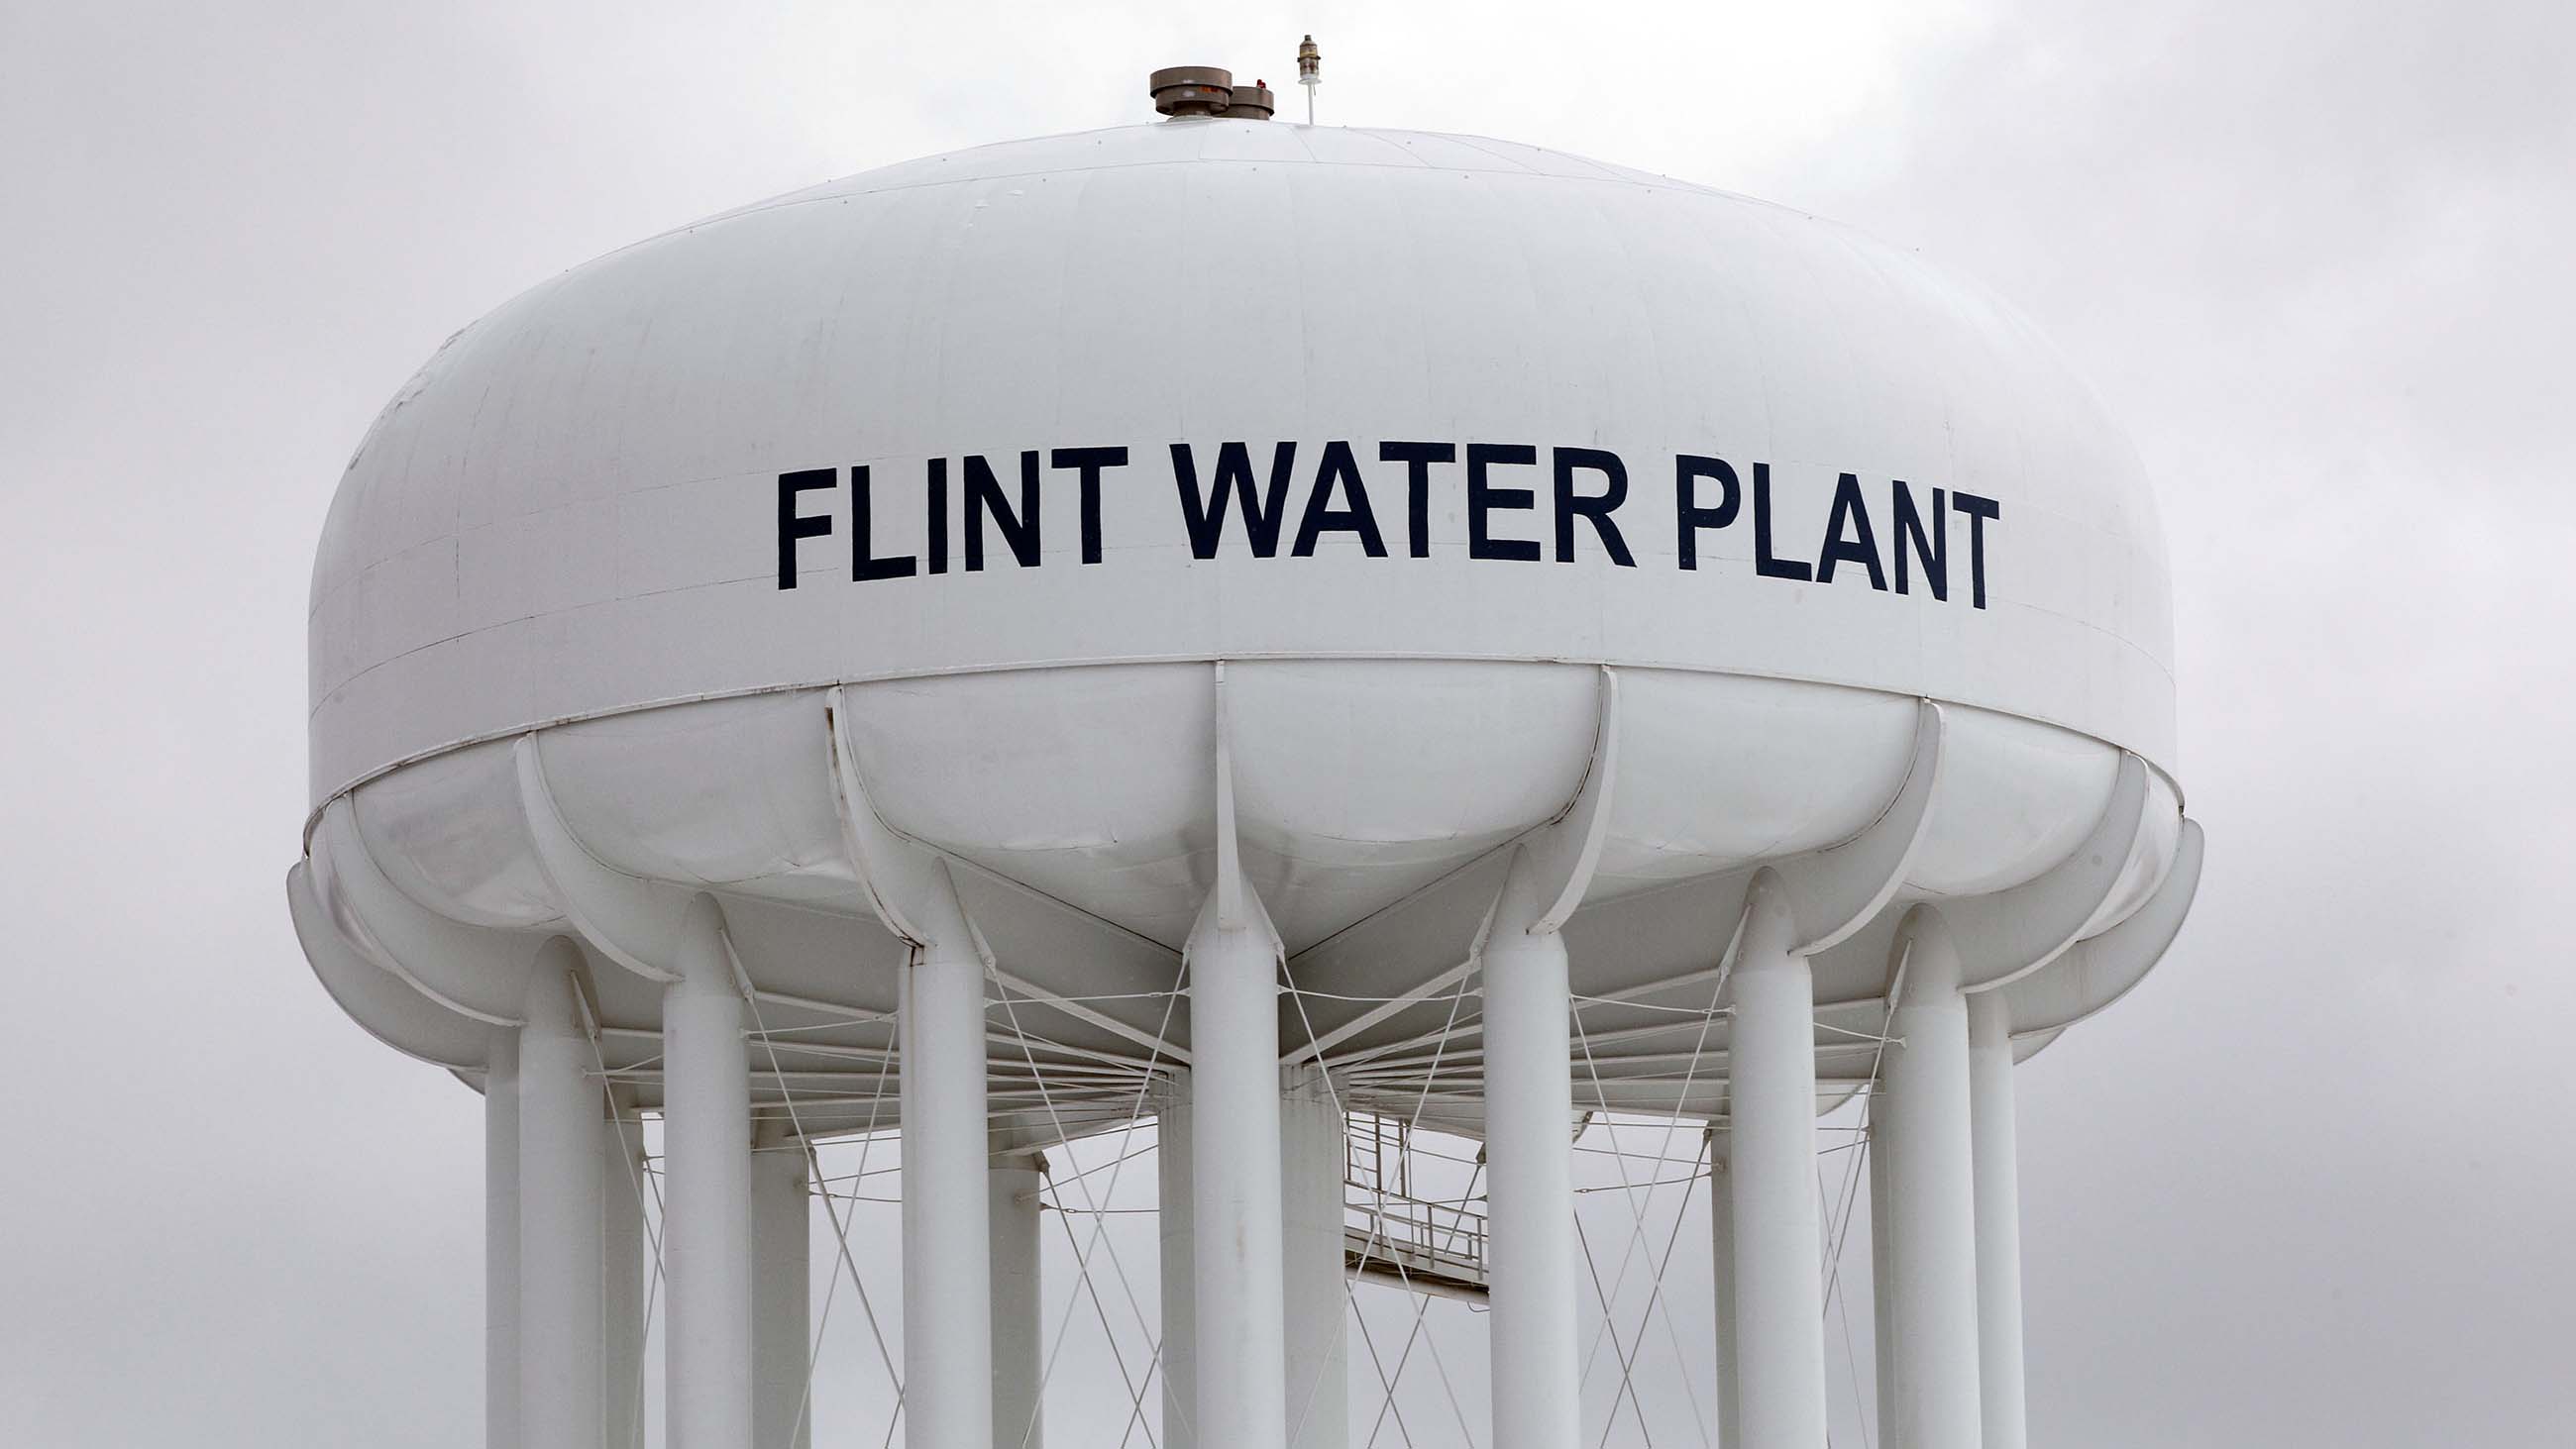 Some residents of Flint are discovering that the blood tests they were given to measure their exposure to lead might have been faulty.